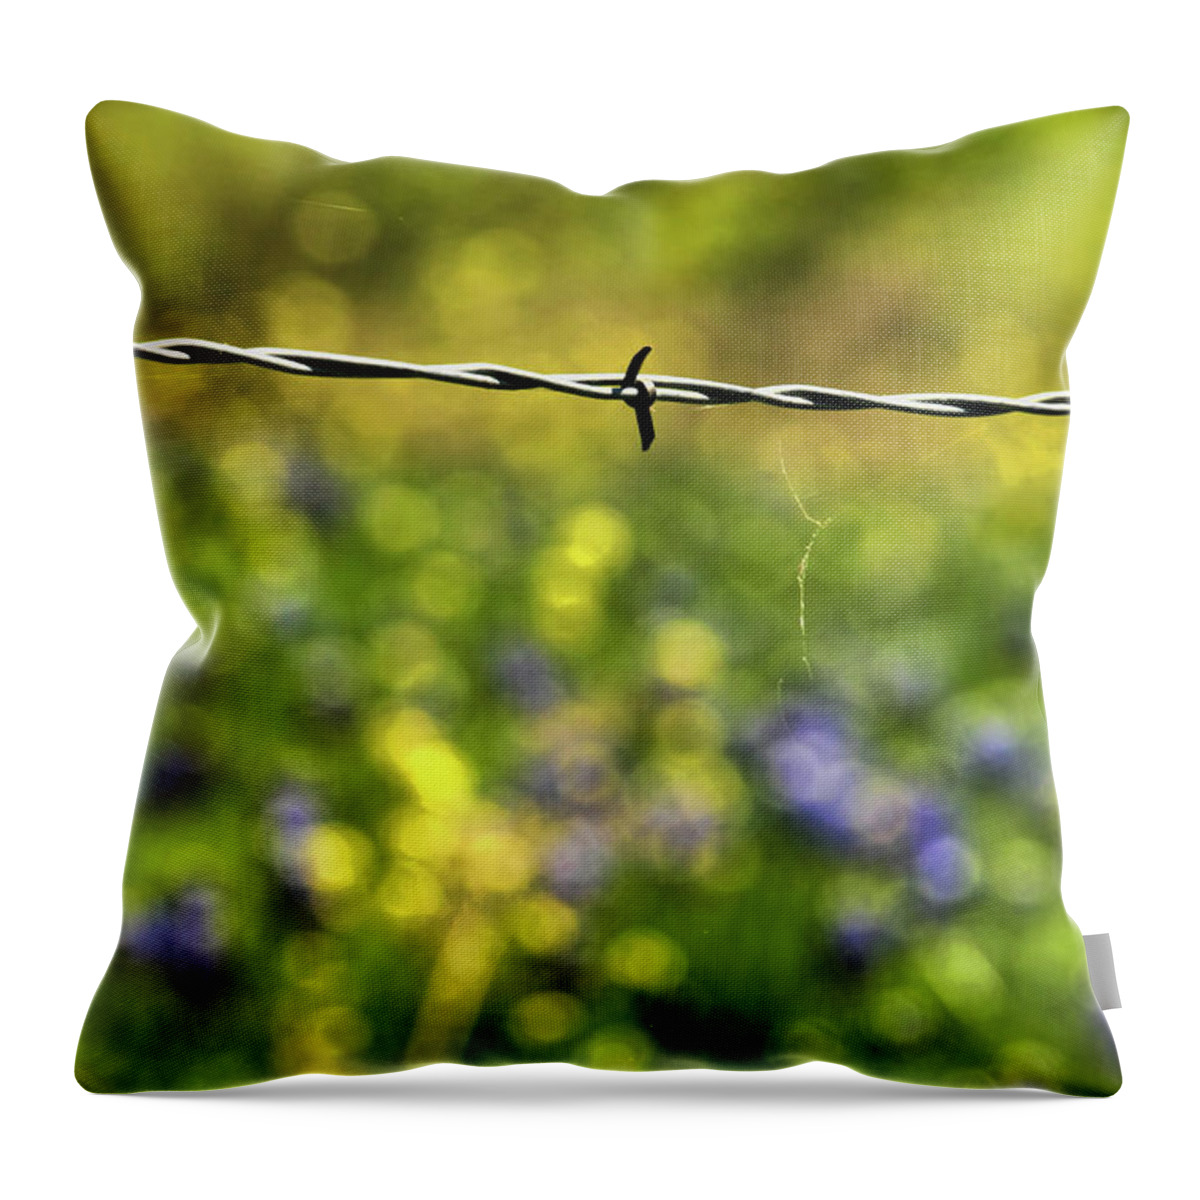 Outdoors Throw Pillow featuring the photograph Wired by Joan Bertucci